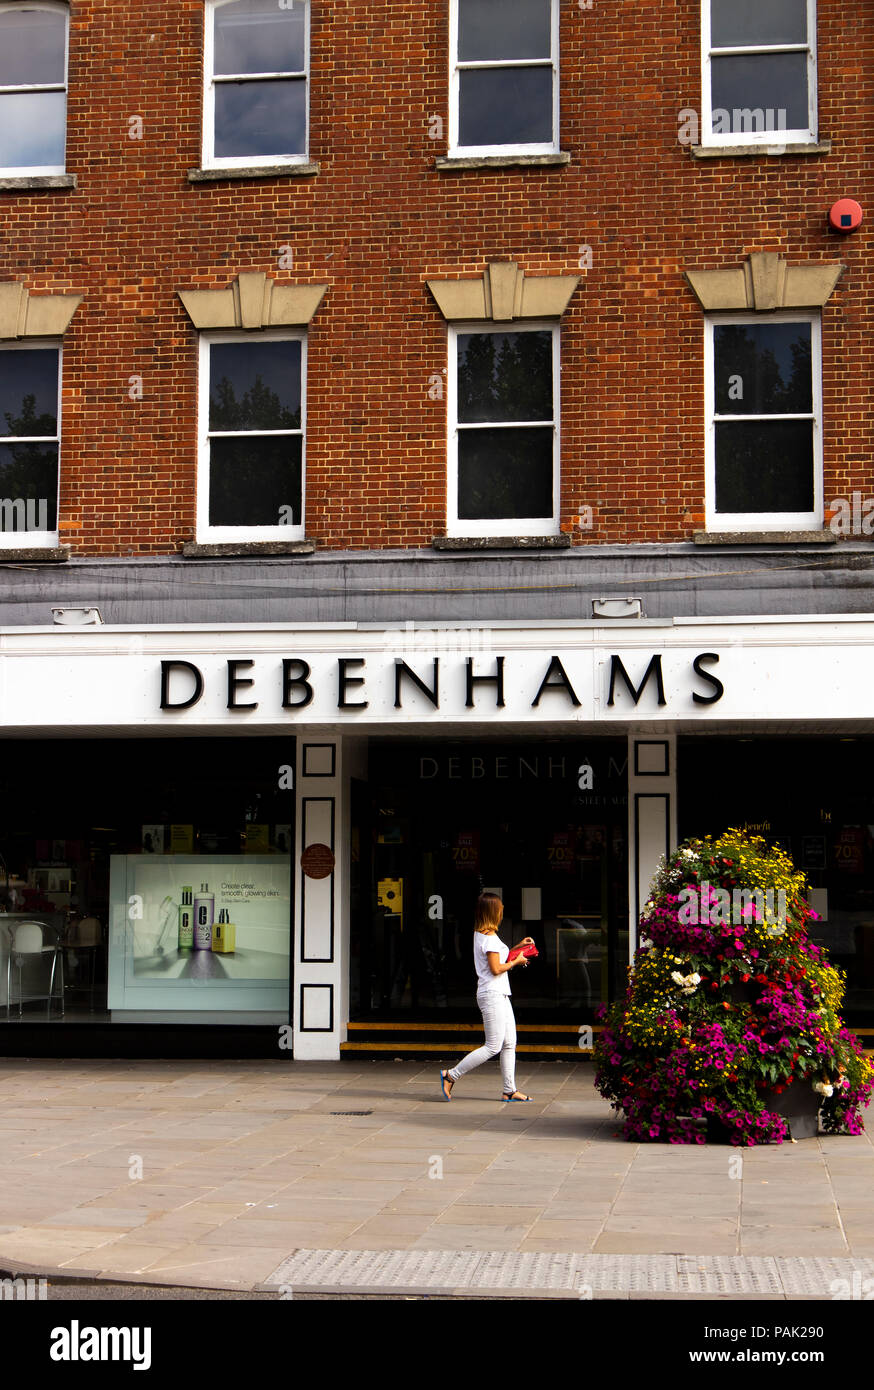 Debenhams department store, founded in 1778 by William Clark, who began  trading at 44 Wigmore Street, London Stock Photo - Alamy